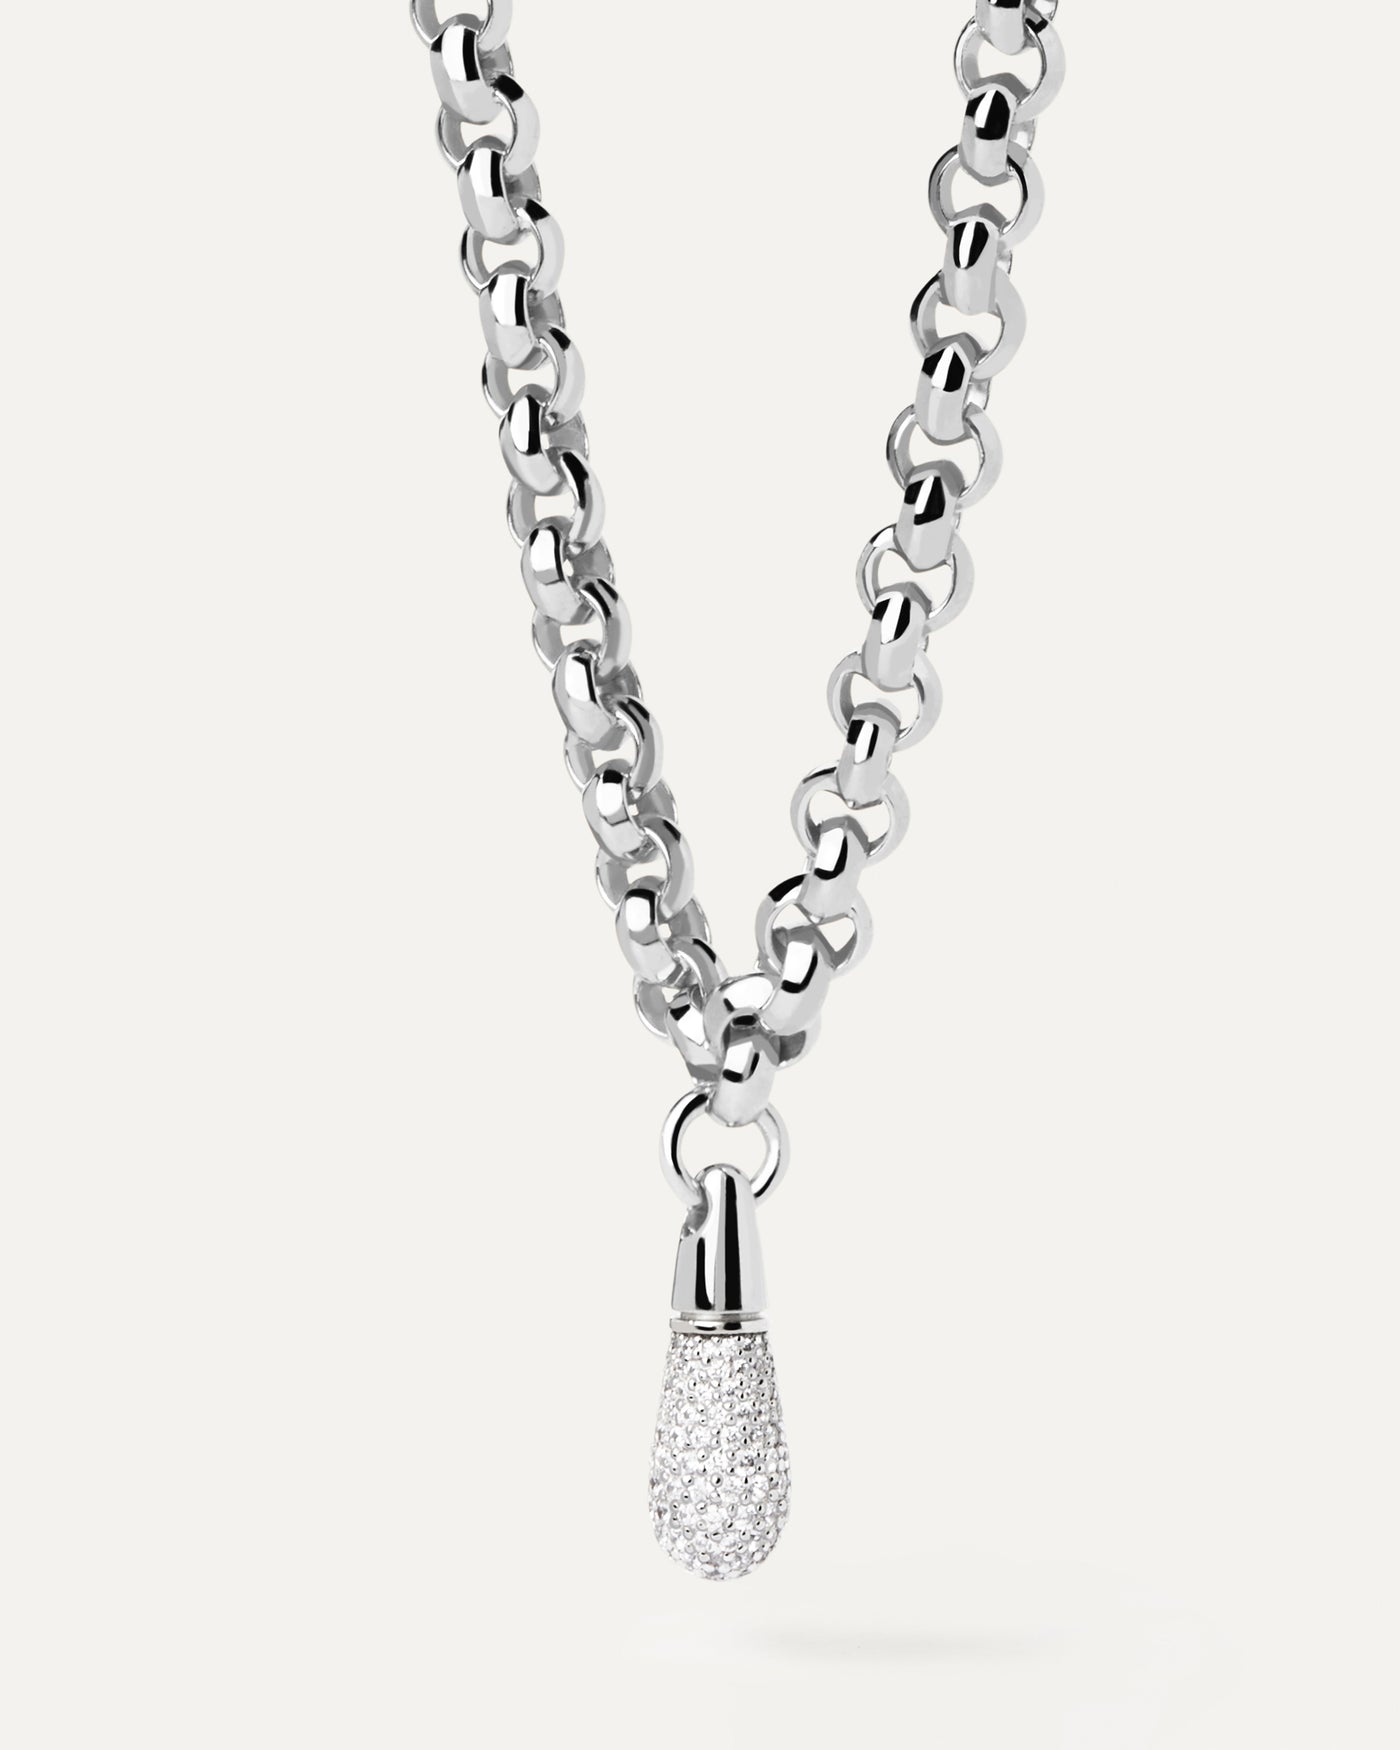 2023 Selection | Jazz Silver Chain Necklace. Get the latest arrival from PDPAOLA. Place your order safely and get this Best Seller. Free Shipping.